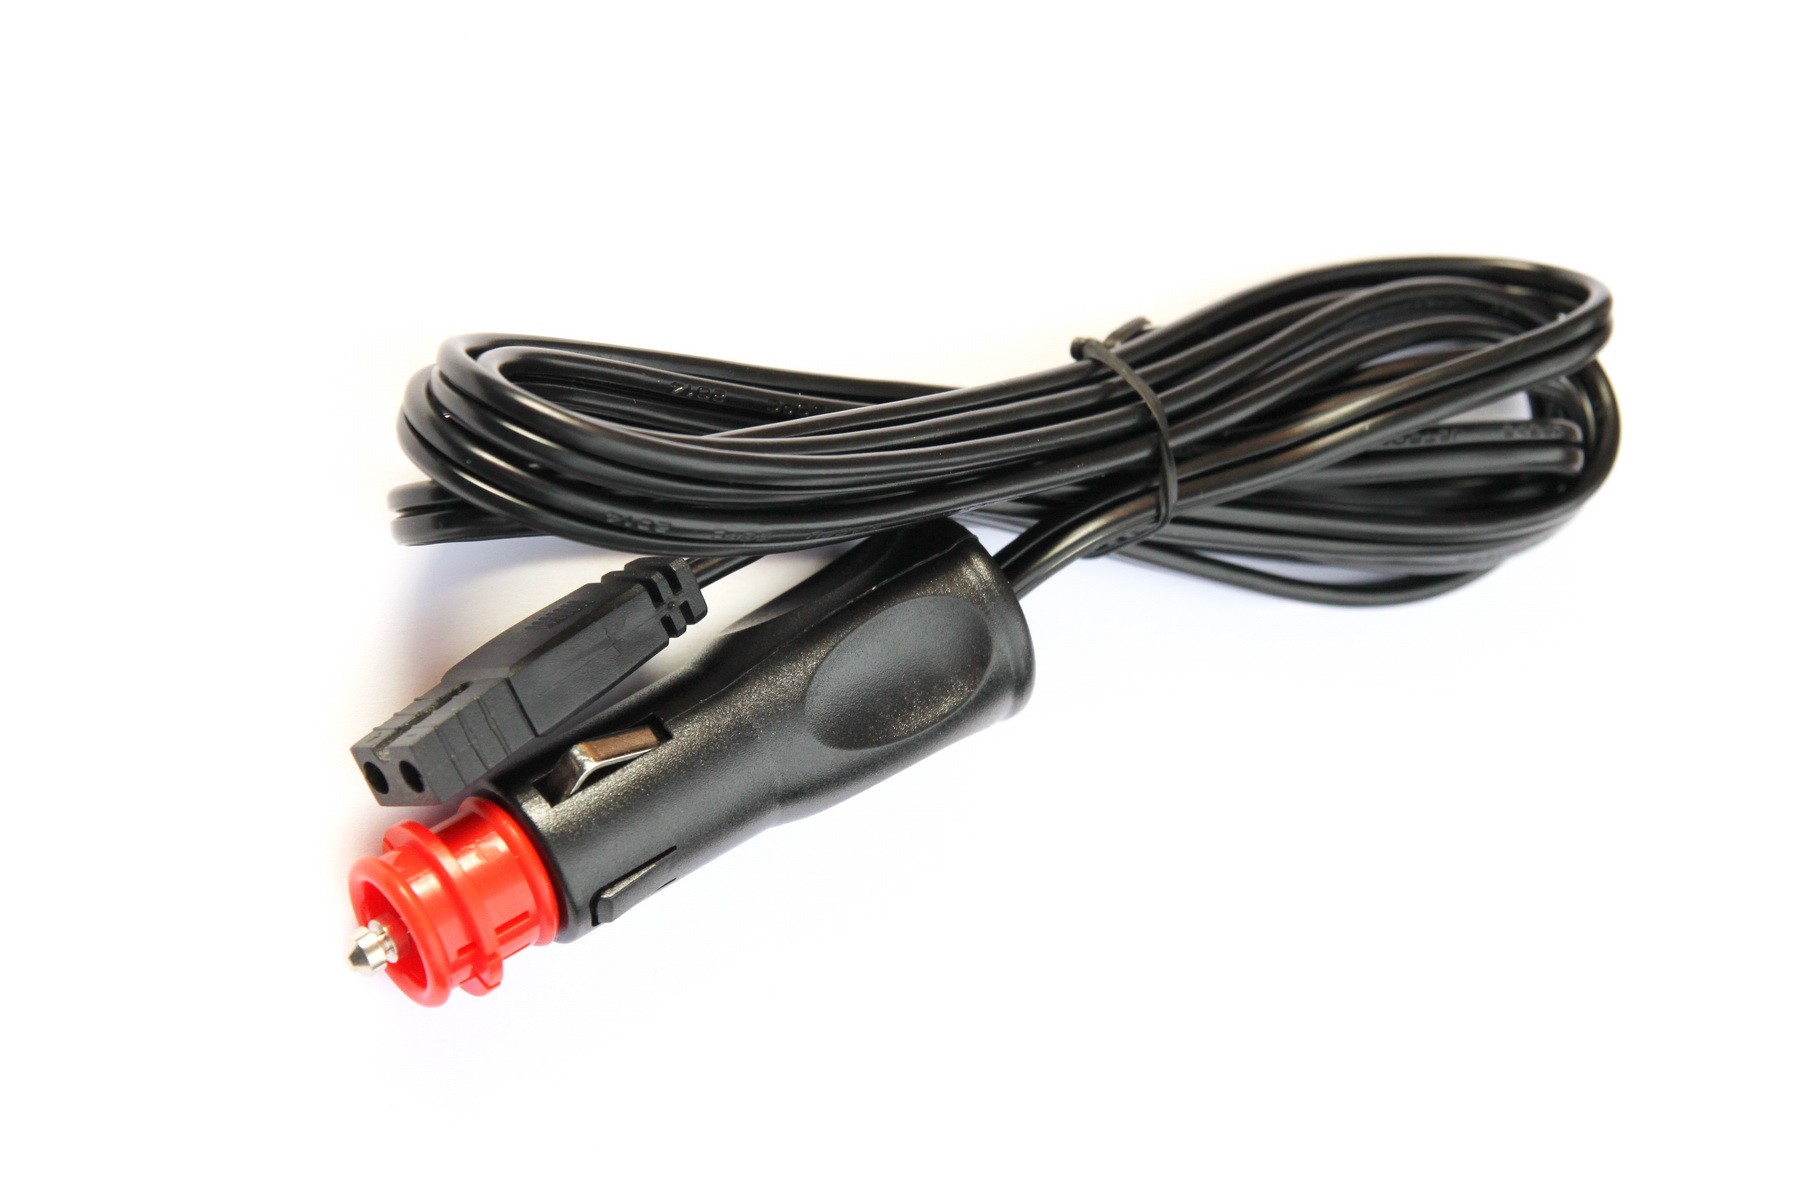 Black BESPORTBLE 12V 2M Extension Cord Car Fridge Cable Power Adapter Electric 12V Extension Cord Mini Electric Automotive Refrigerator Extension Power Adapter Cable Cord 